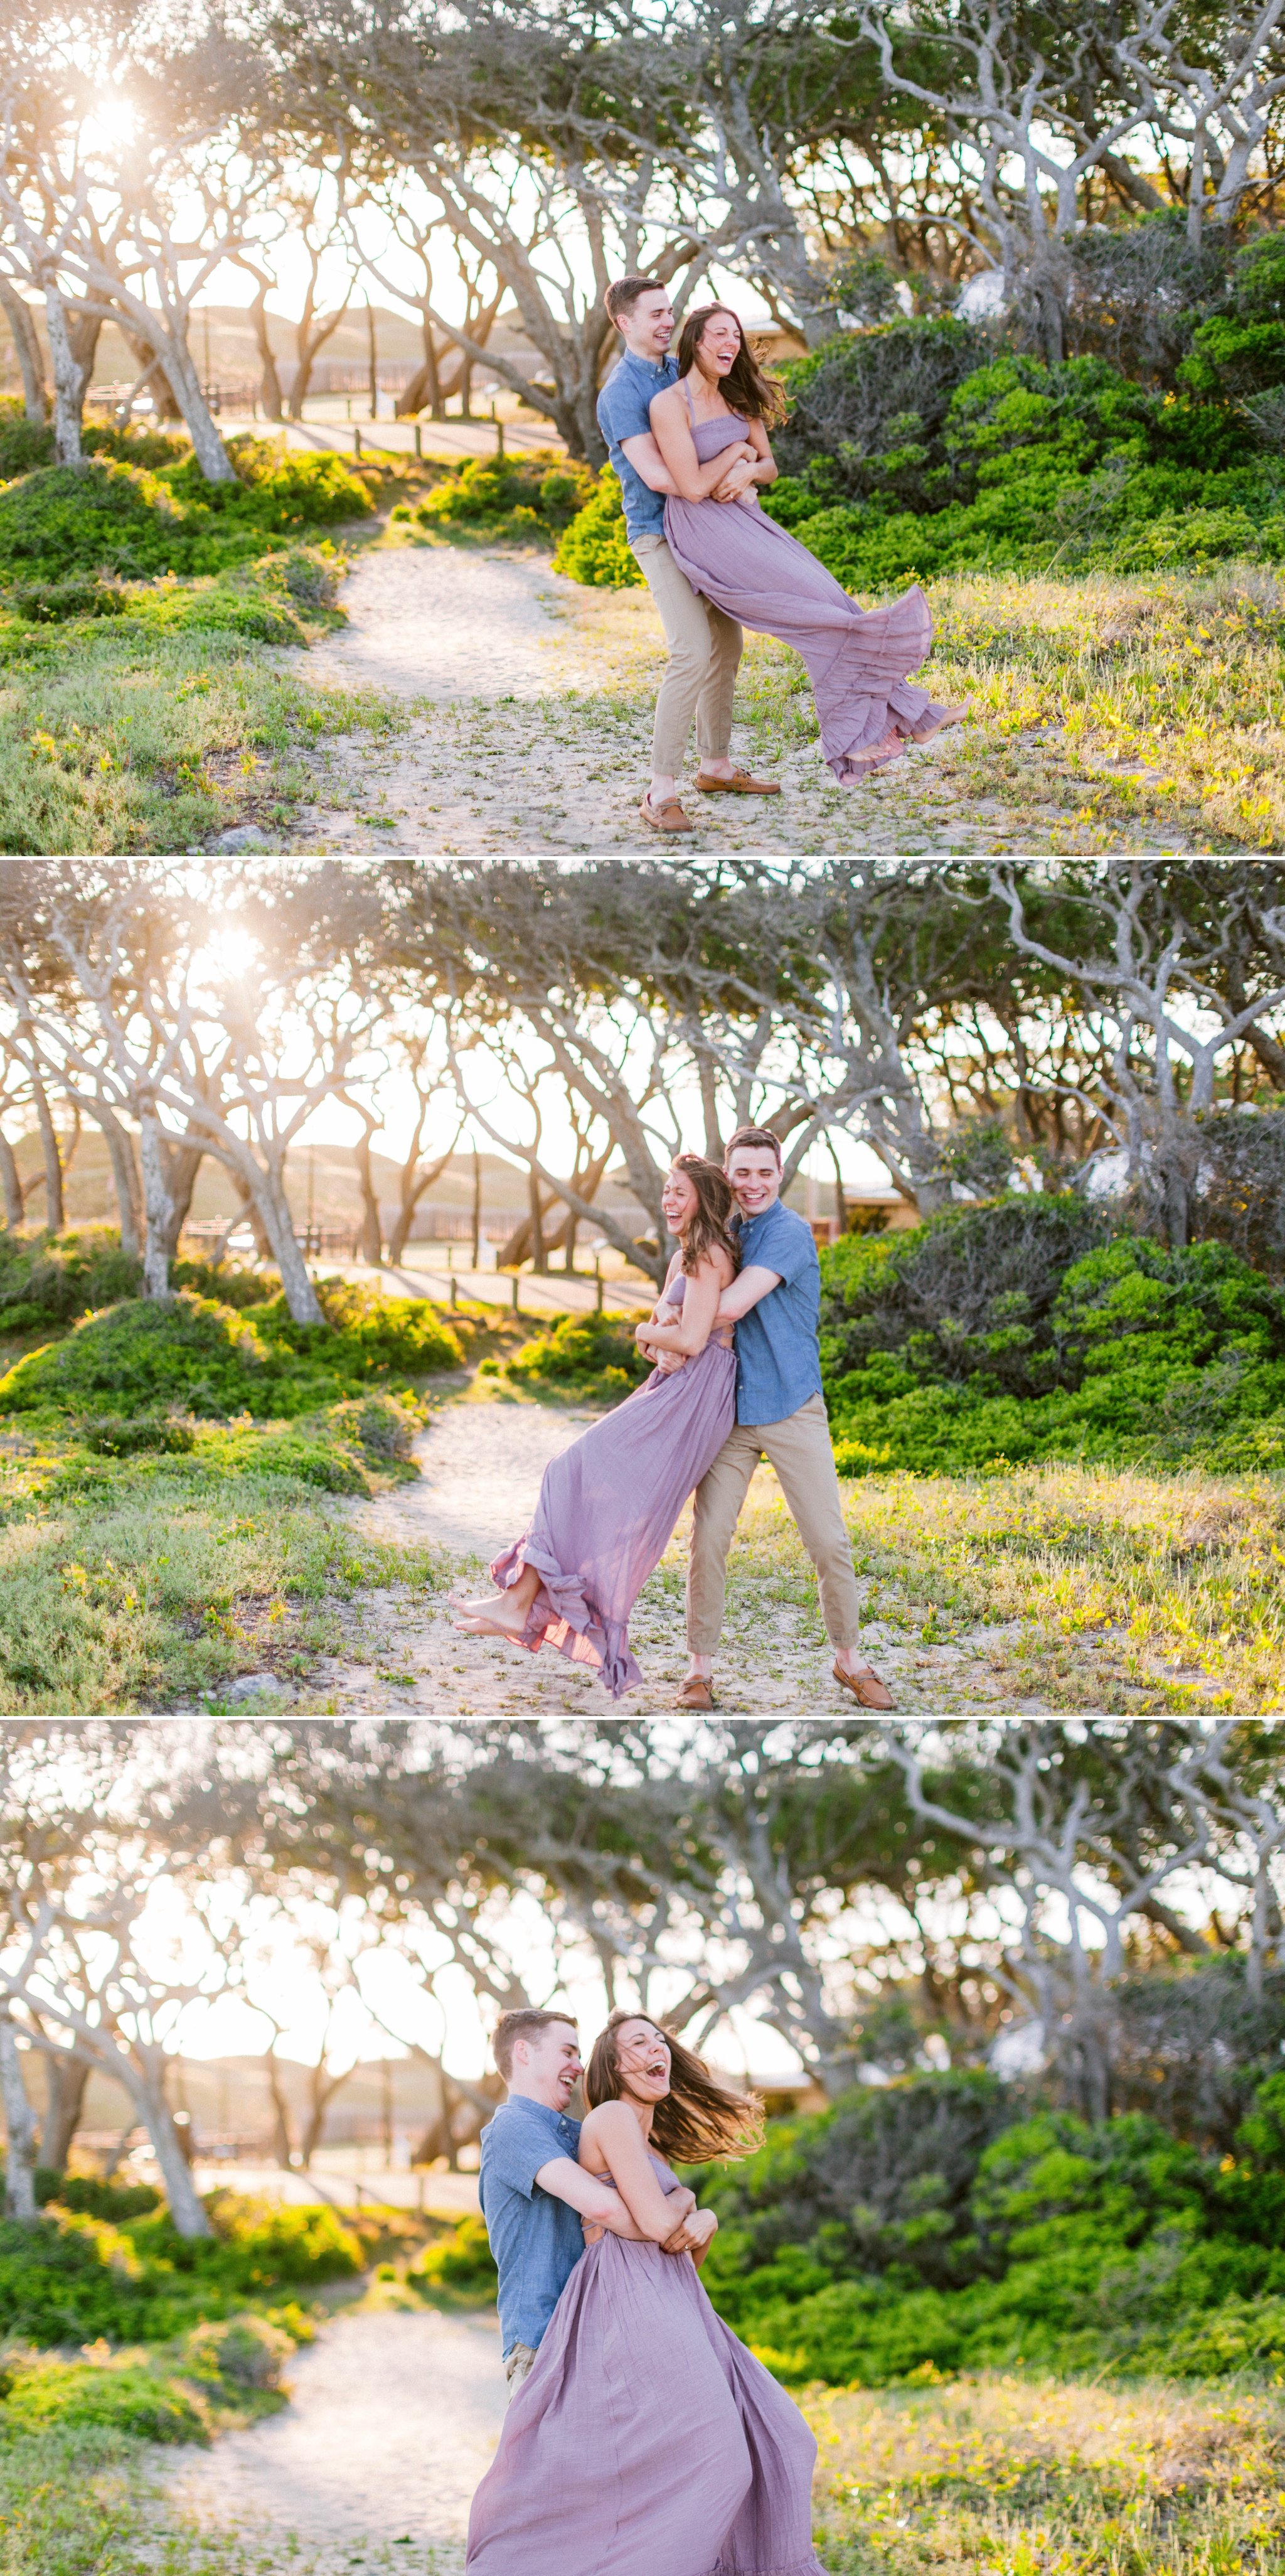  Guy dancing with girl in front of live oak trees with the sunset behind them - Woman is in a flowy pastel maxi dress - unposed and candid outdoor golden light session - engagement photographer in honolulu, oahu, hawaii - johanna dye 